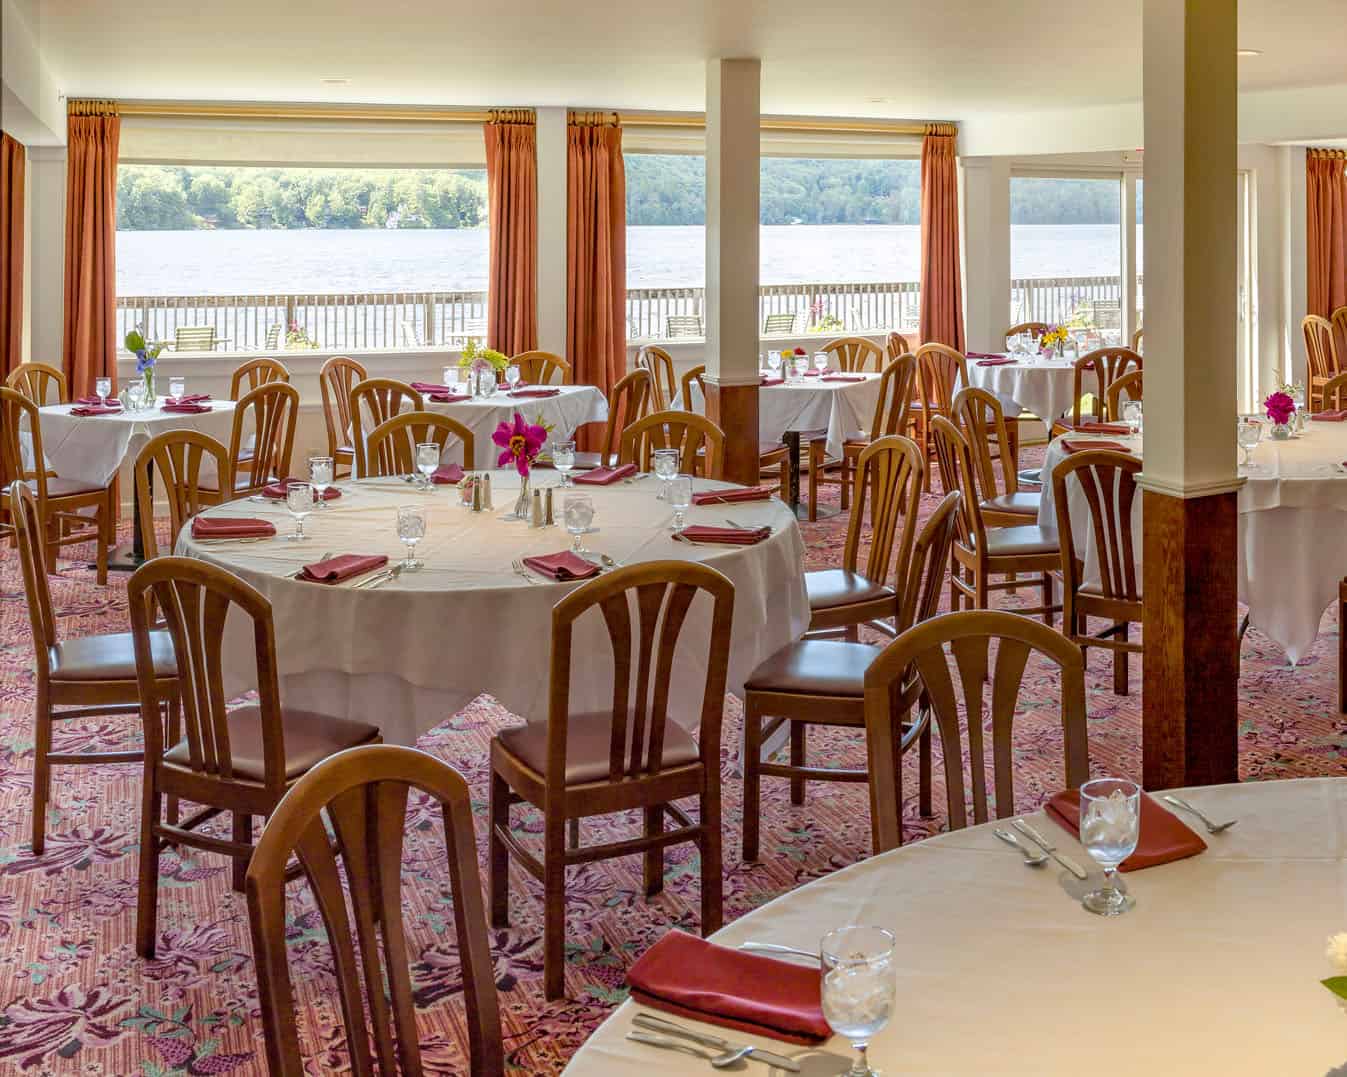 Lake Morey Resort - Dining Room with Lakeview